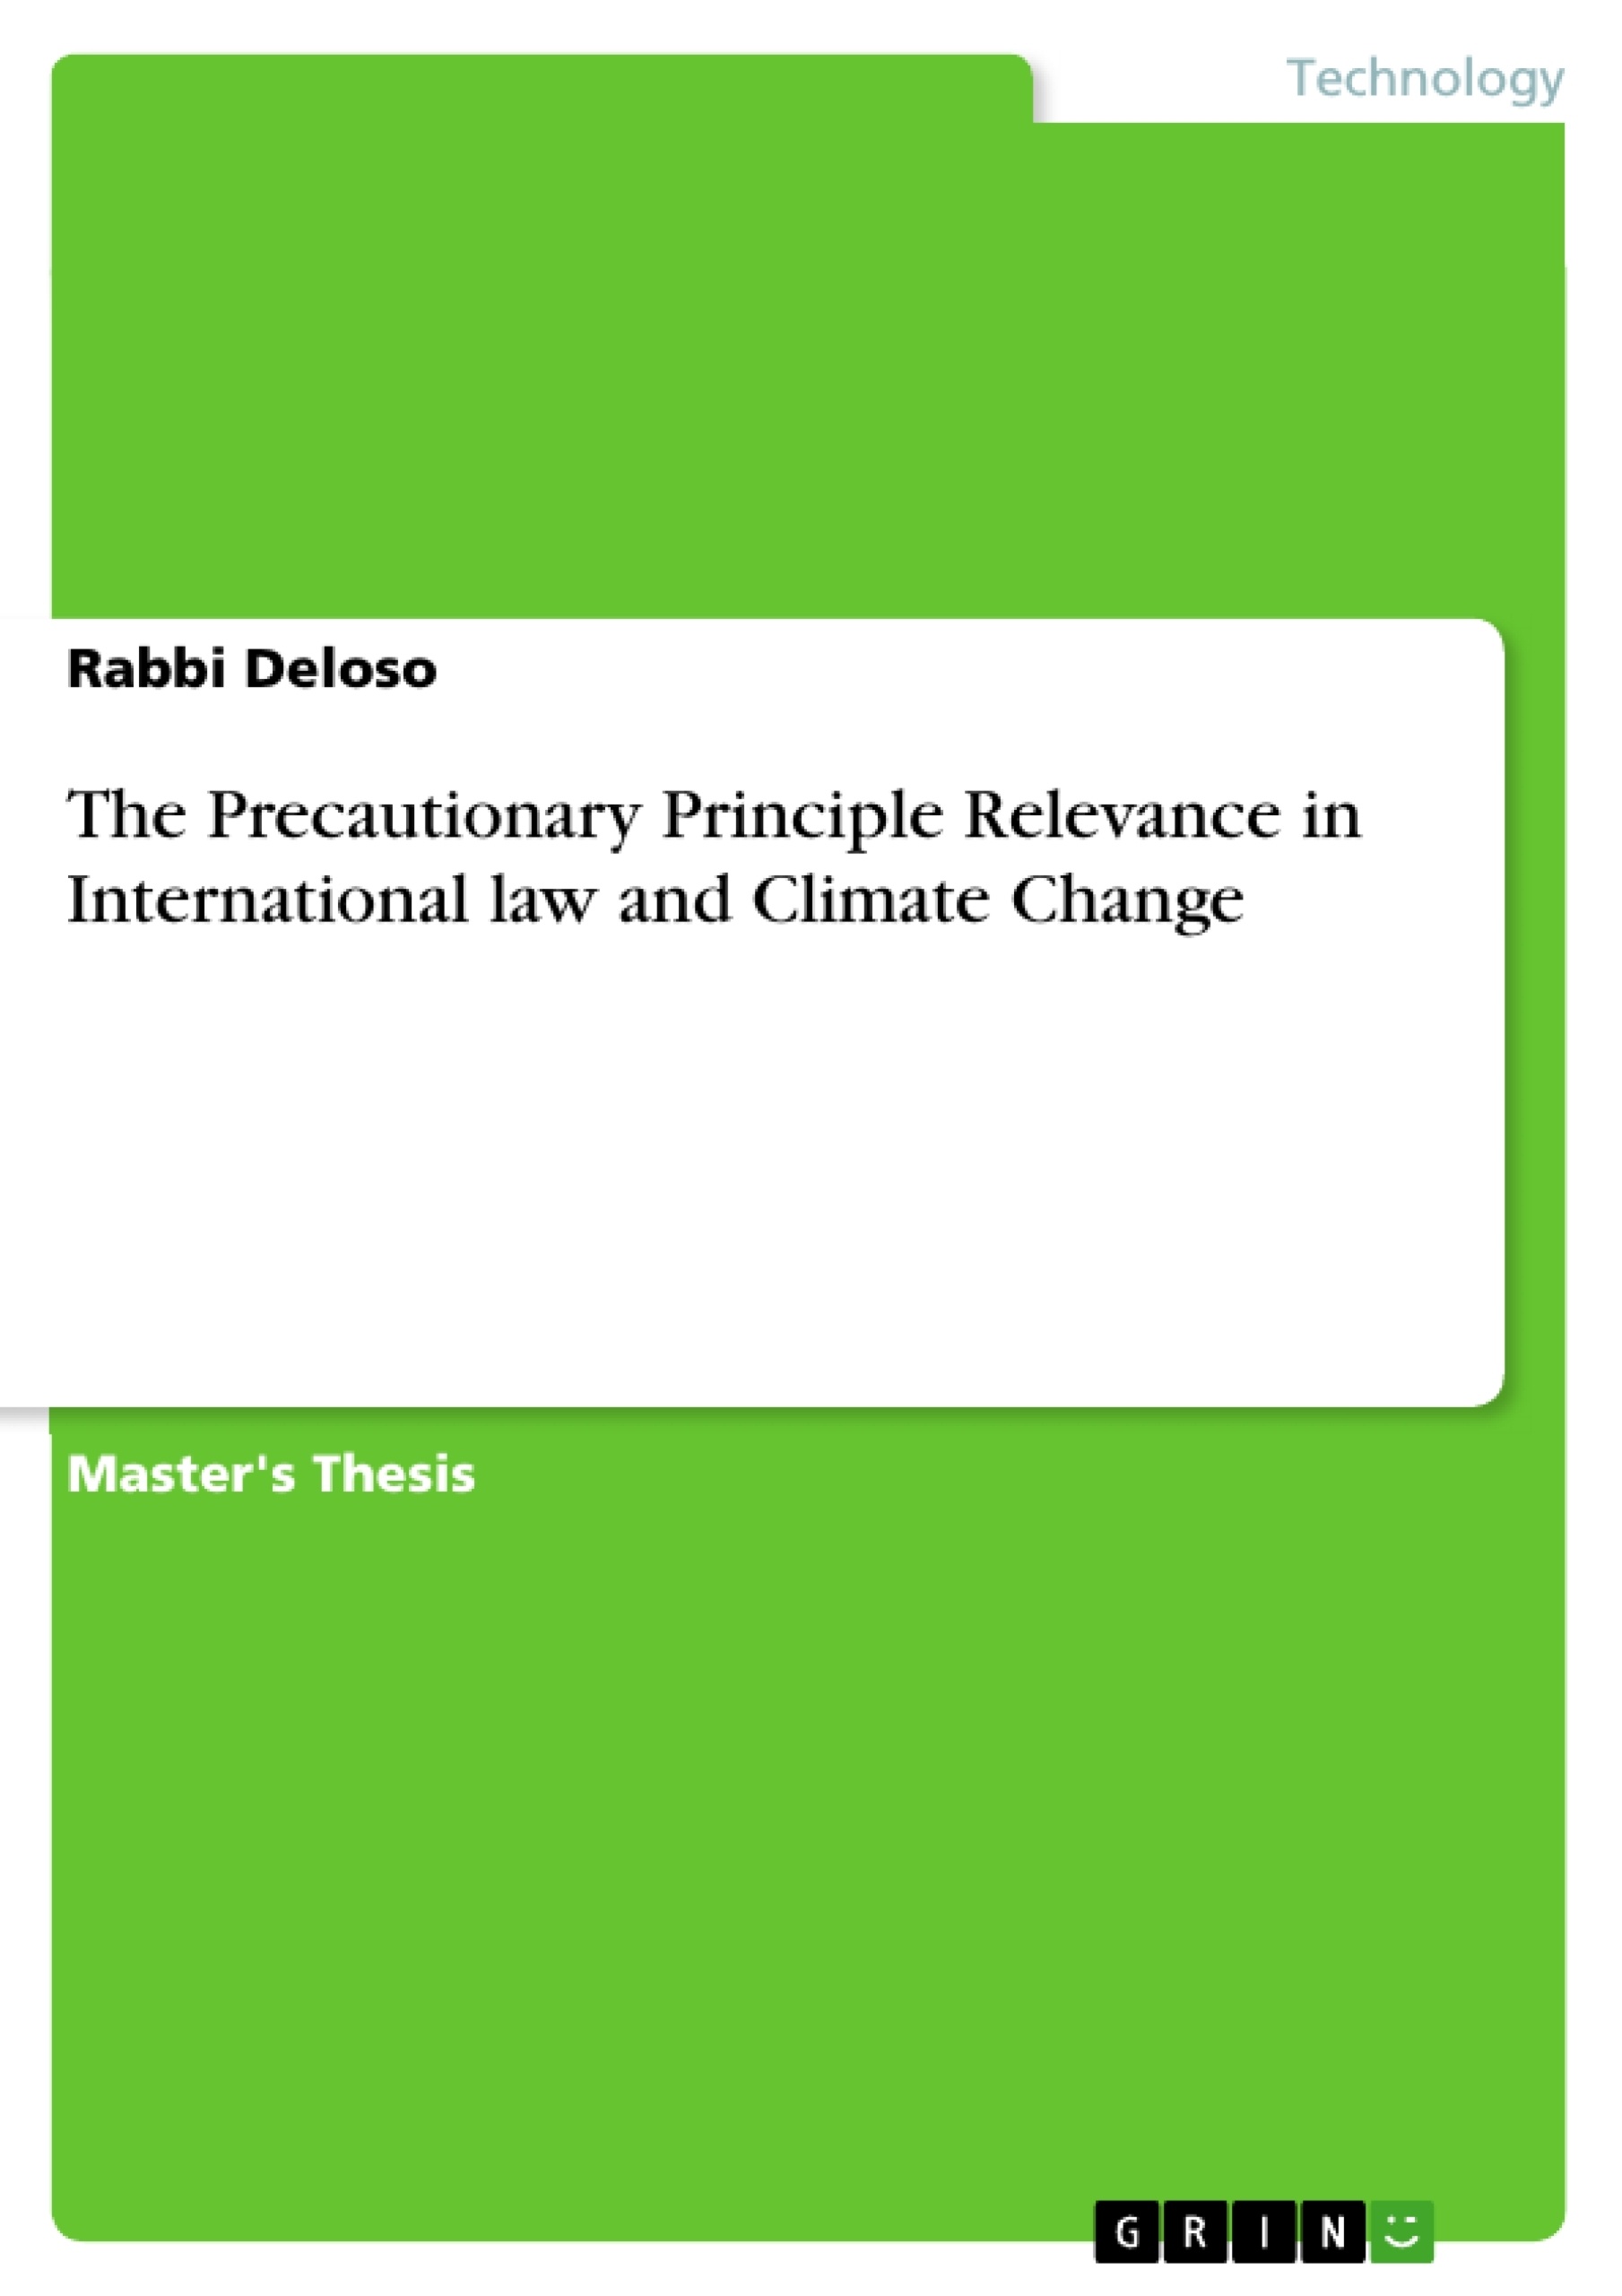 Title: The Precautionary Principle Relevance in International law and Climate Change